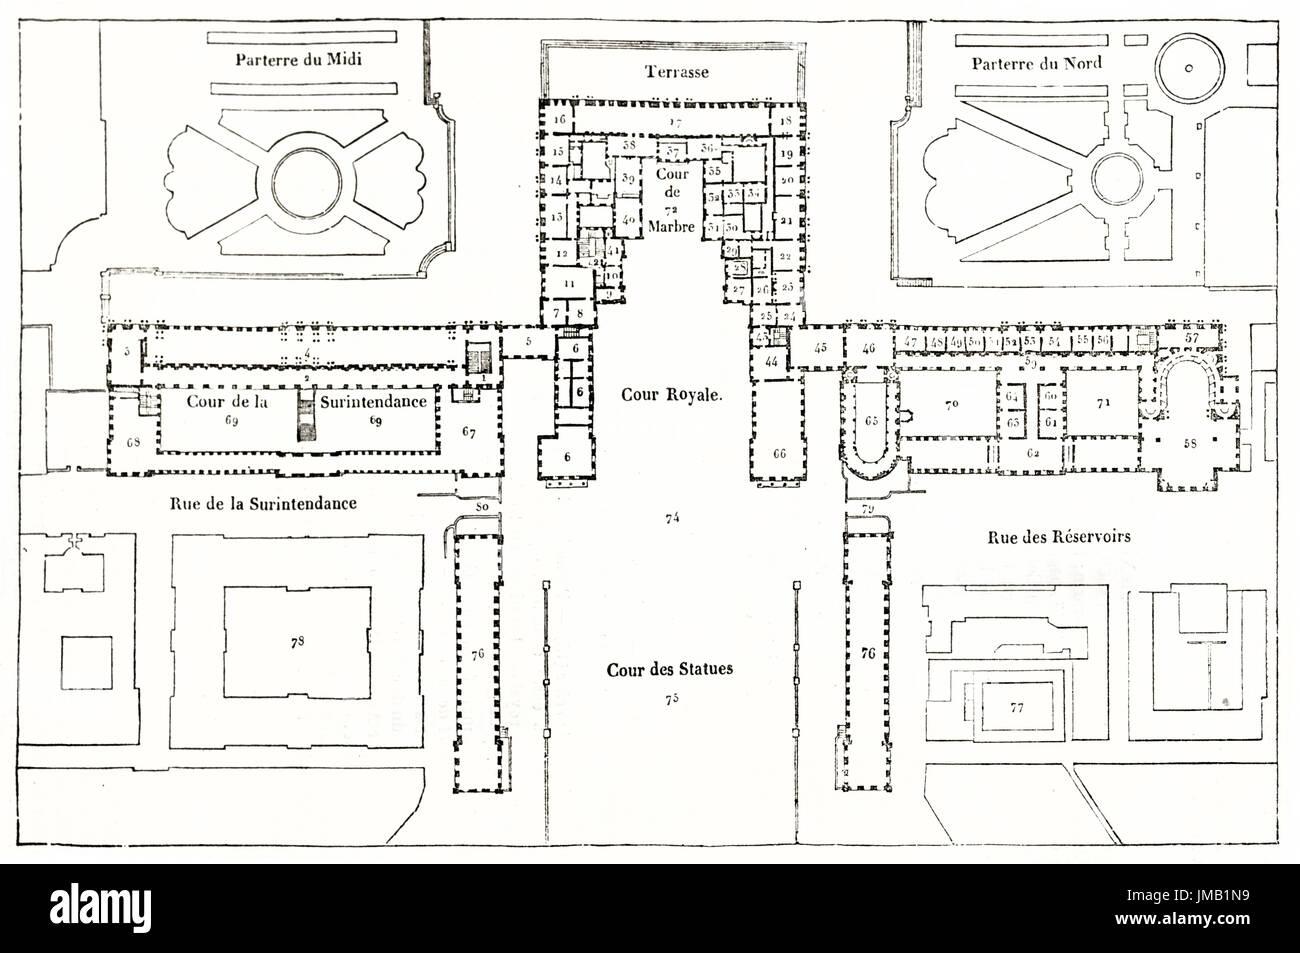 Old plan of Versailles palace. By unidentified author, published on Magasin Pittoresque, Paris, 1837. Stock Photo